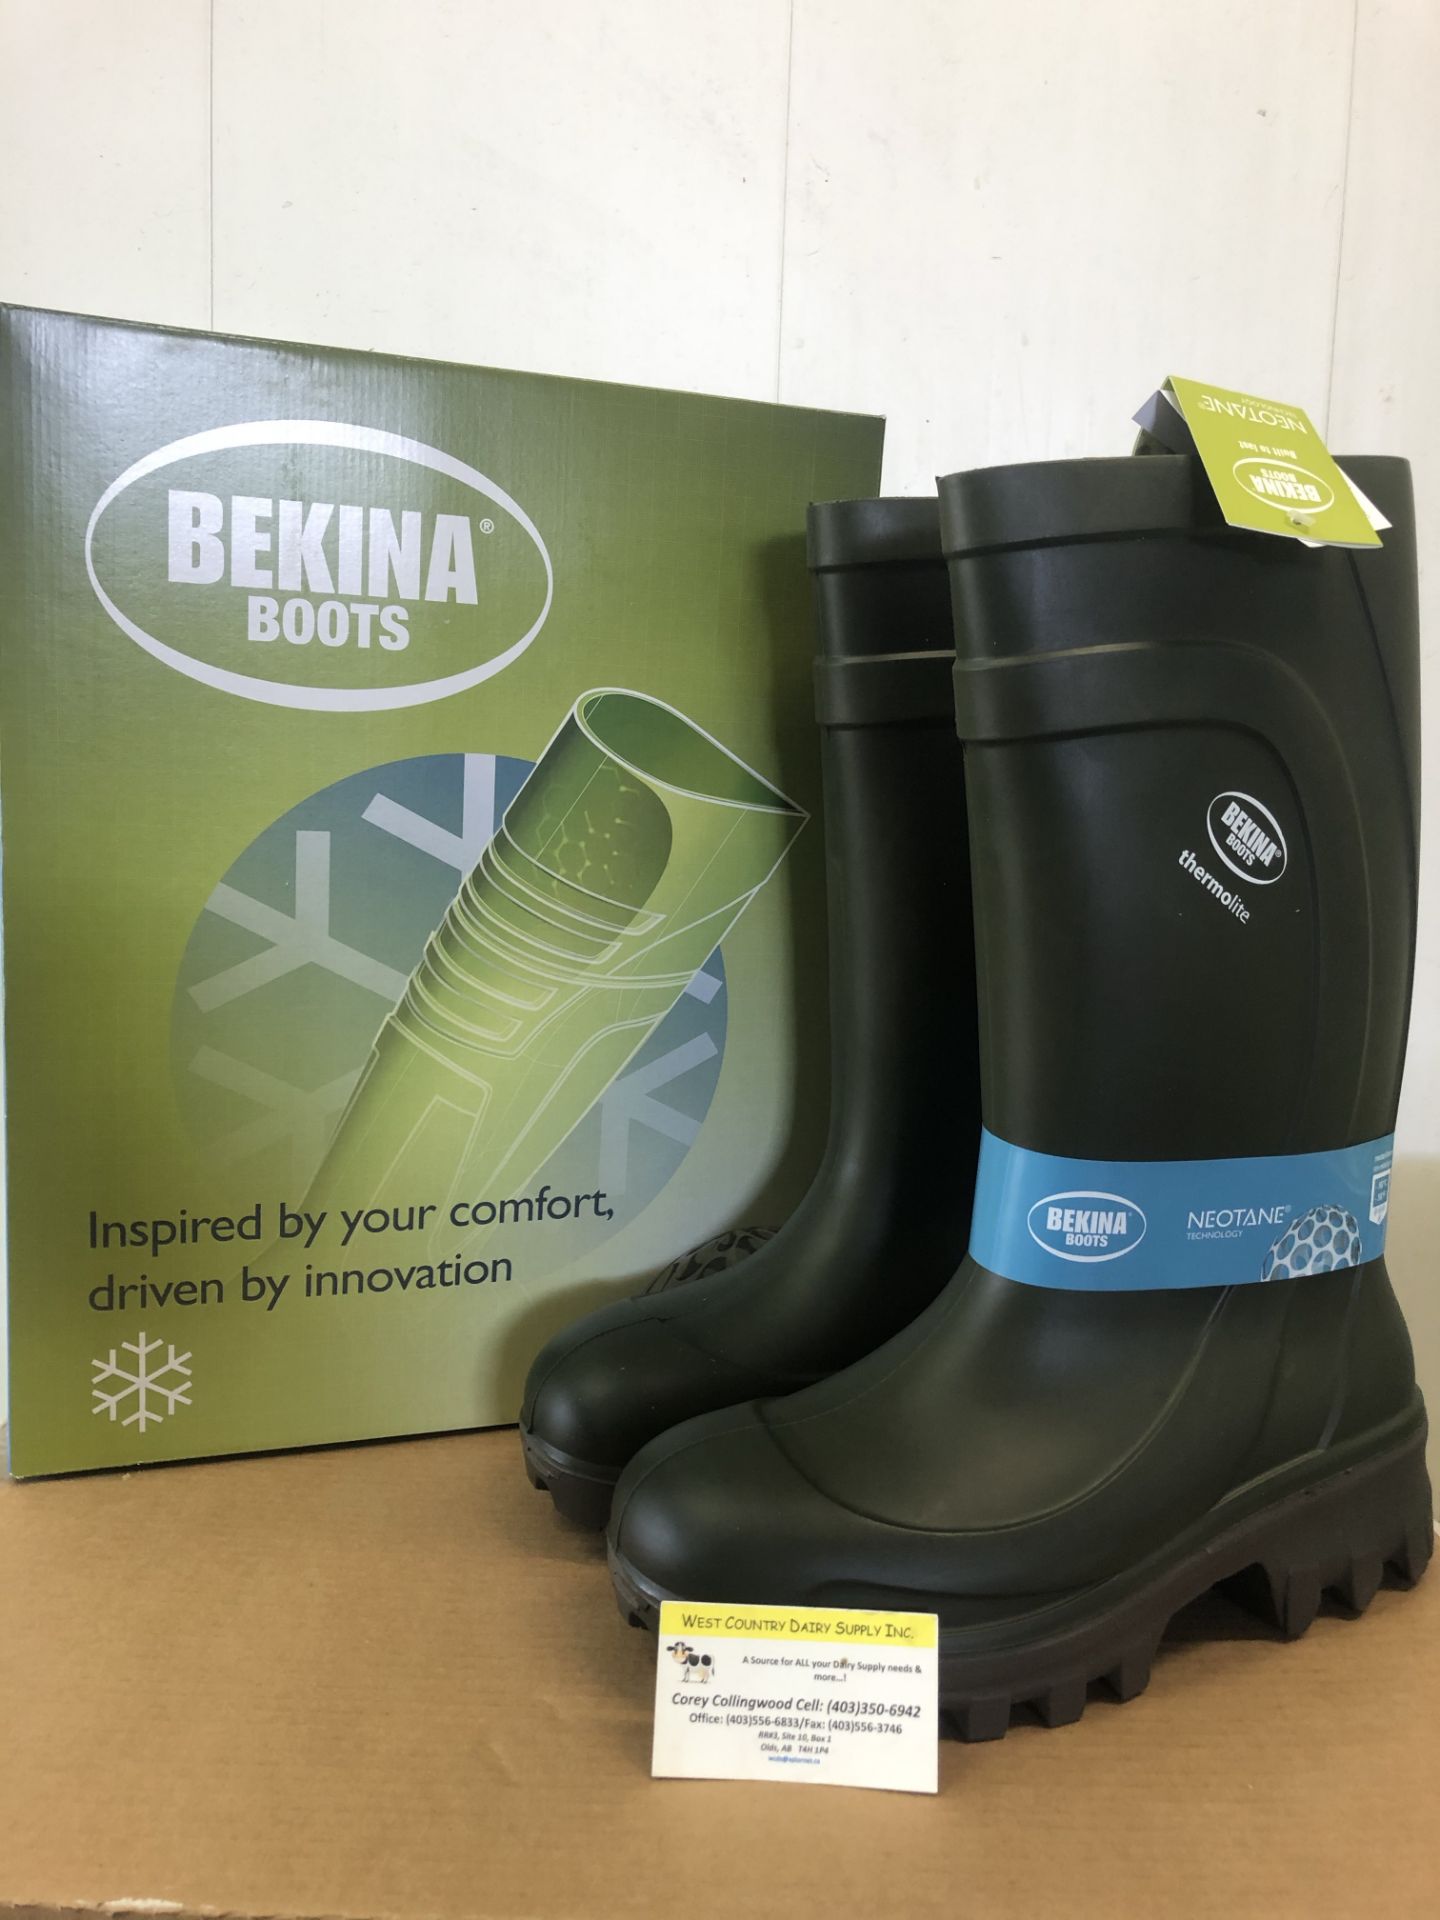 THERMOLITE BEKINA BOOTS GIFT CERTIFICATE Let us know the size you need and we will get it to you. - Image 2 of 2